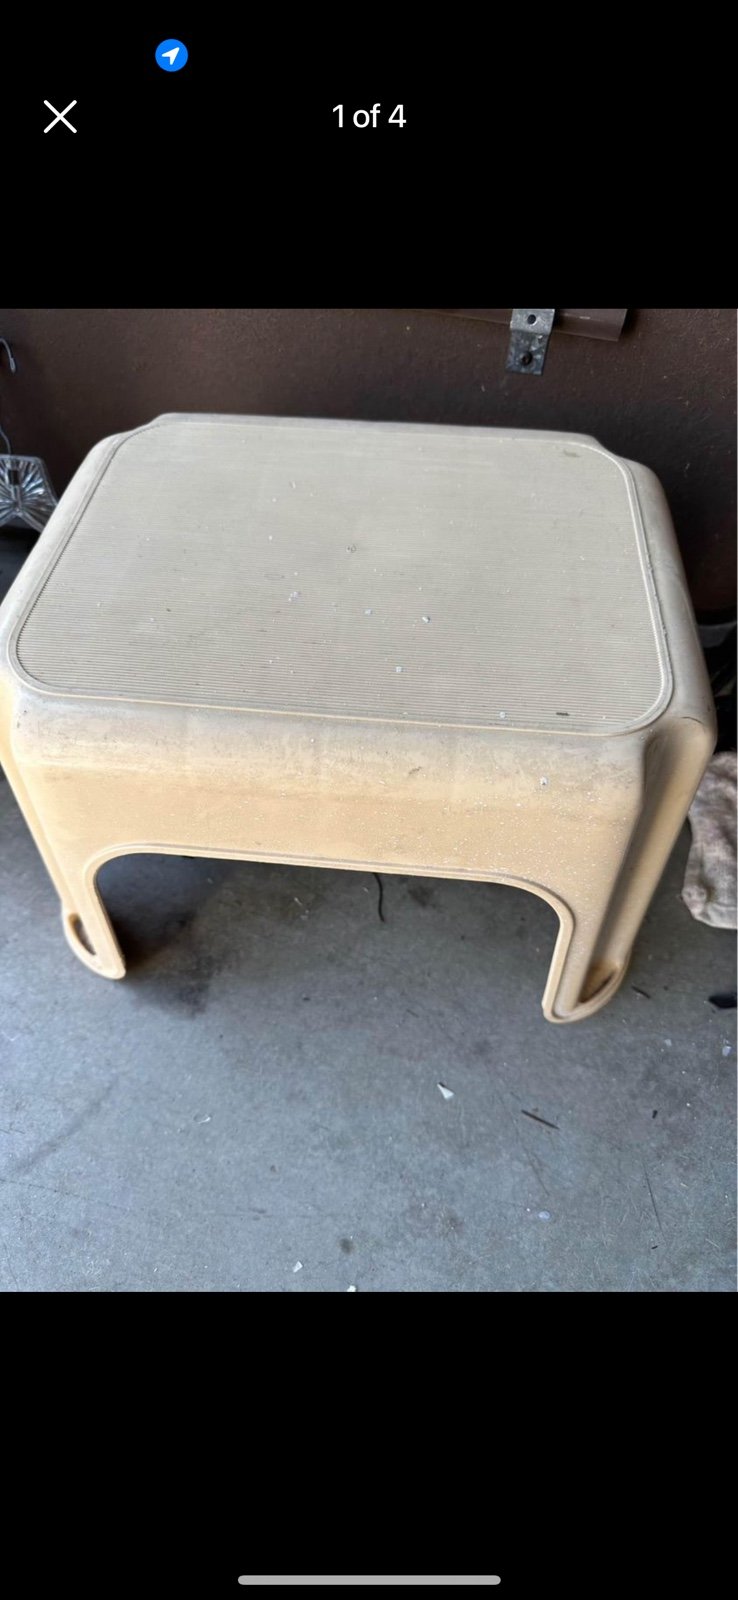 Vintage High Quality Stepping Stool 300LBS limit VSbDoRMDW Great